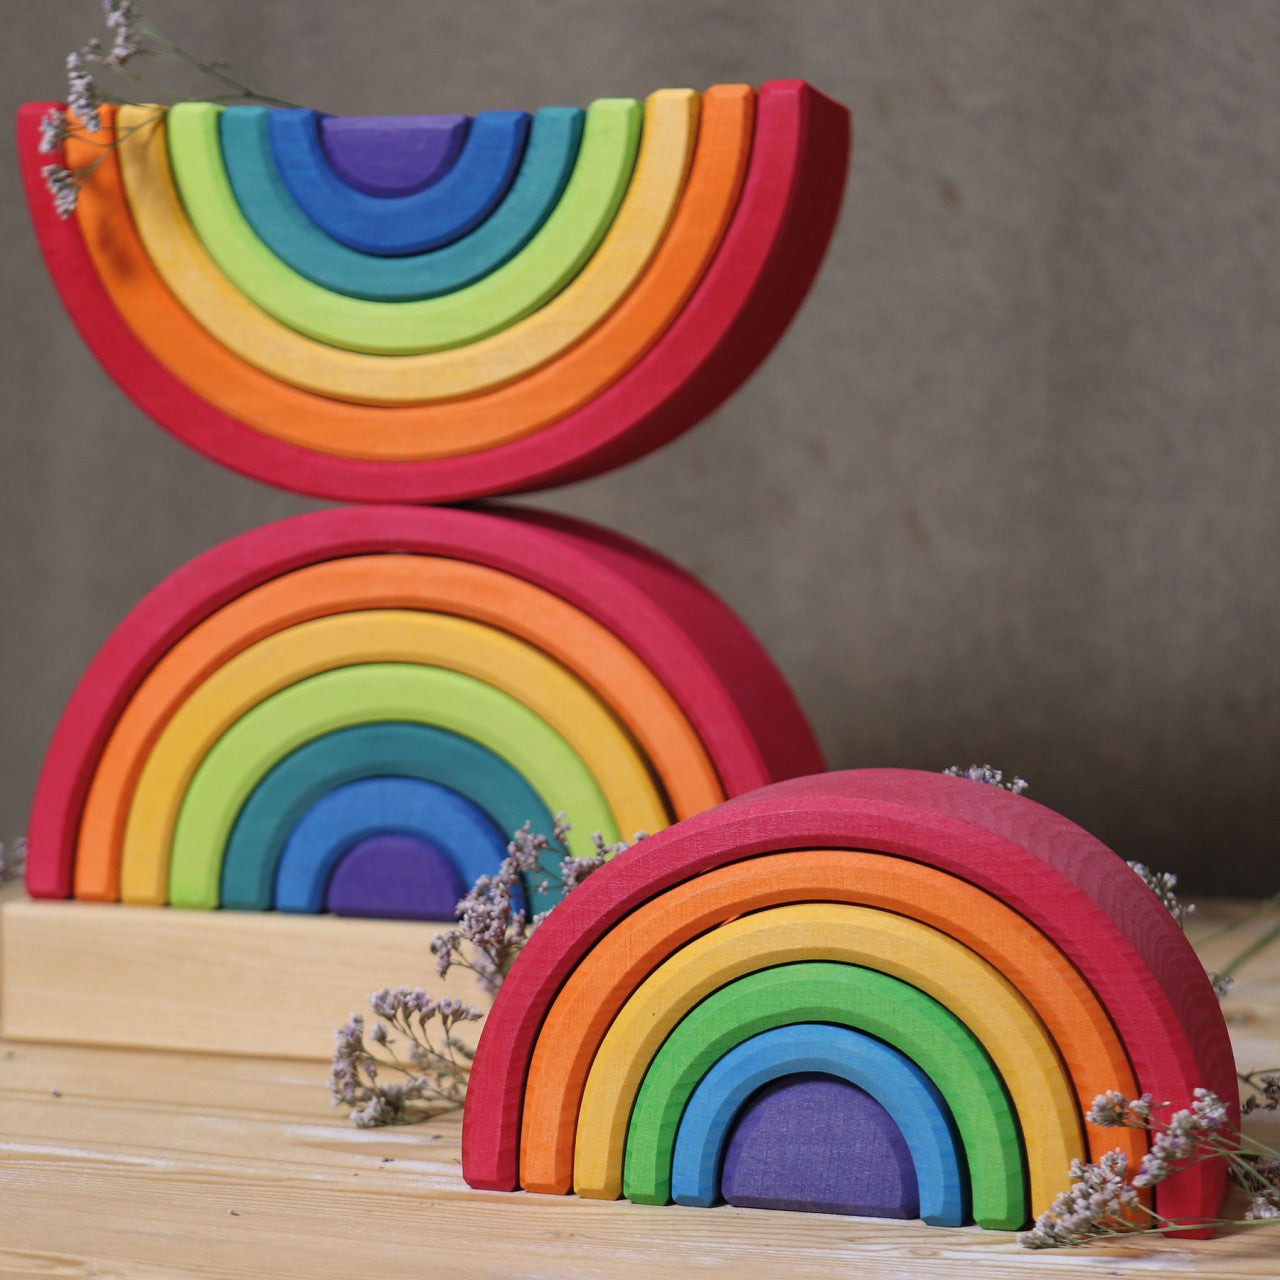 Rainbow Stacking Tower | Wooden Toys for Kids | Toddler Activity Toy